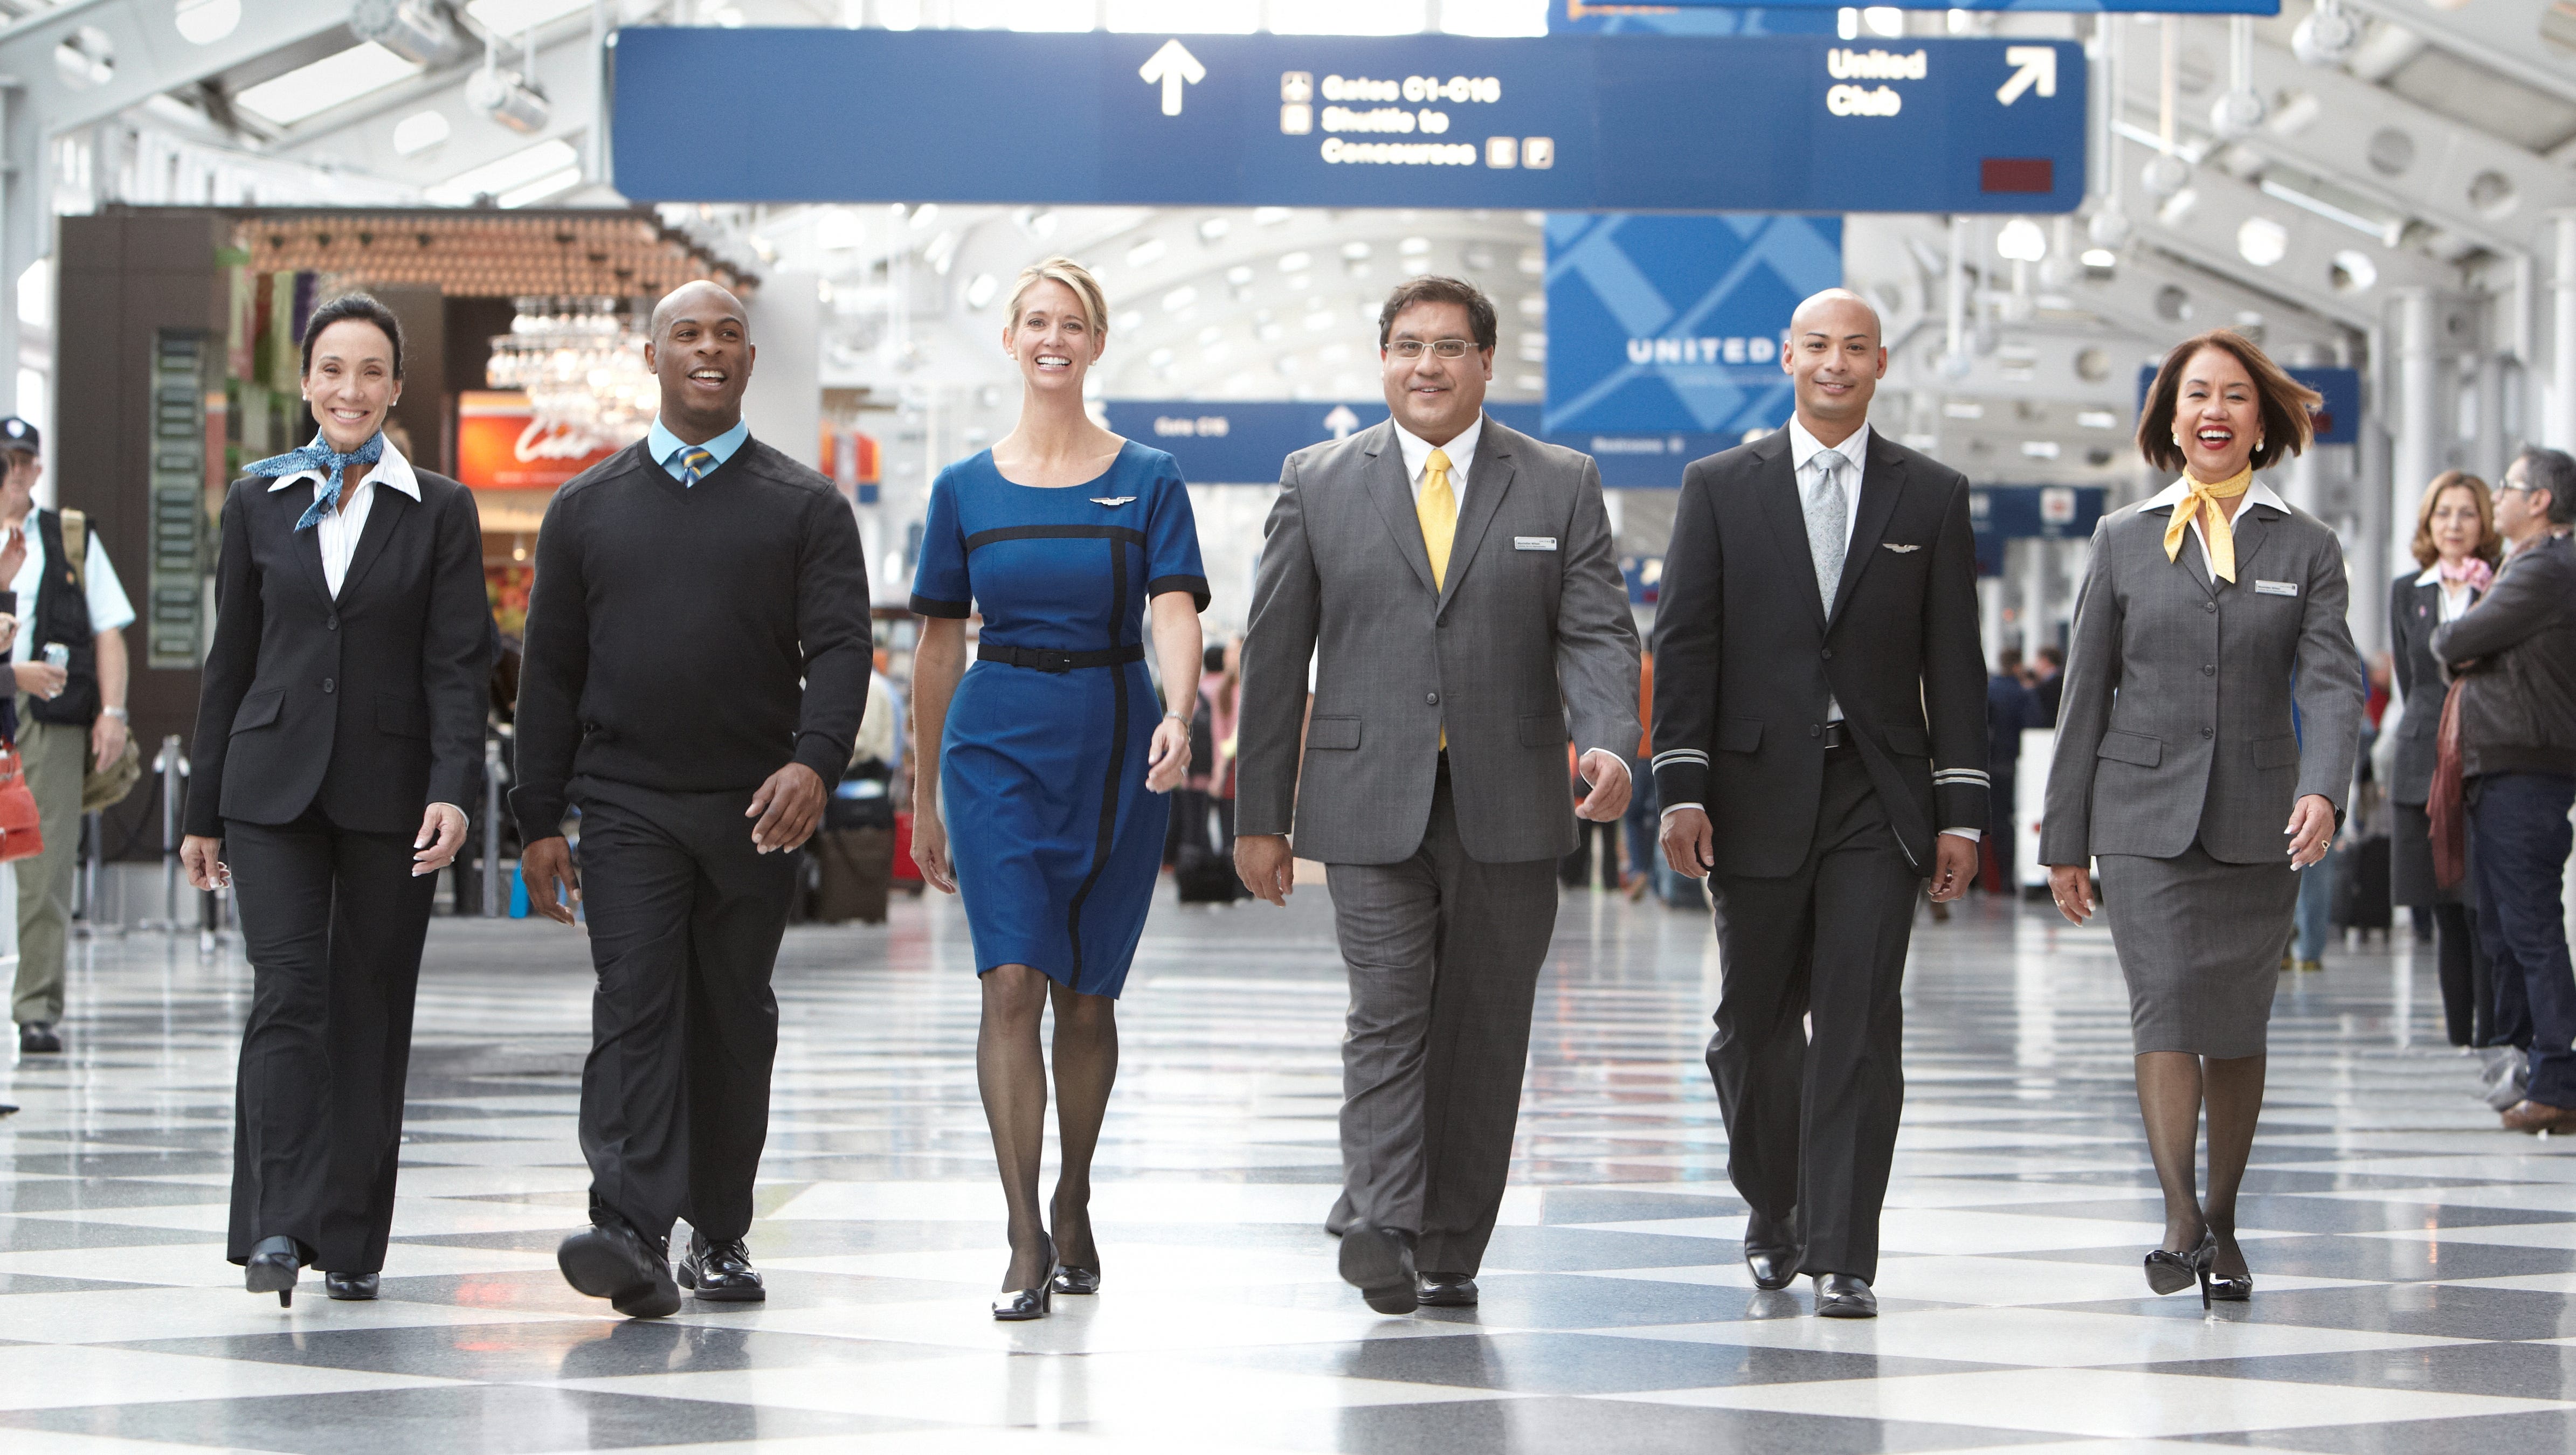 United rolls out new uniforms for attendants, others